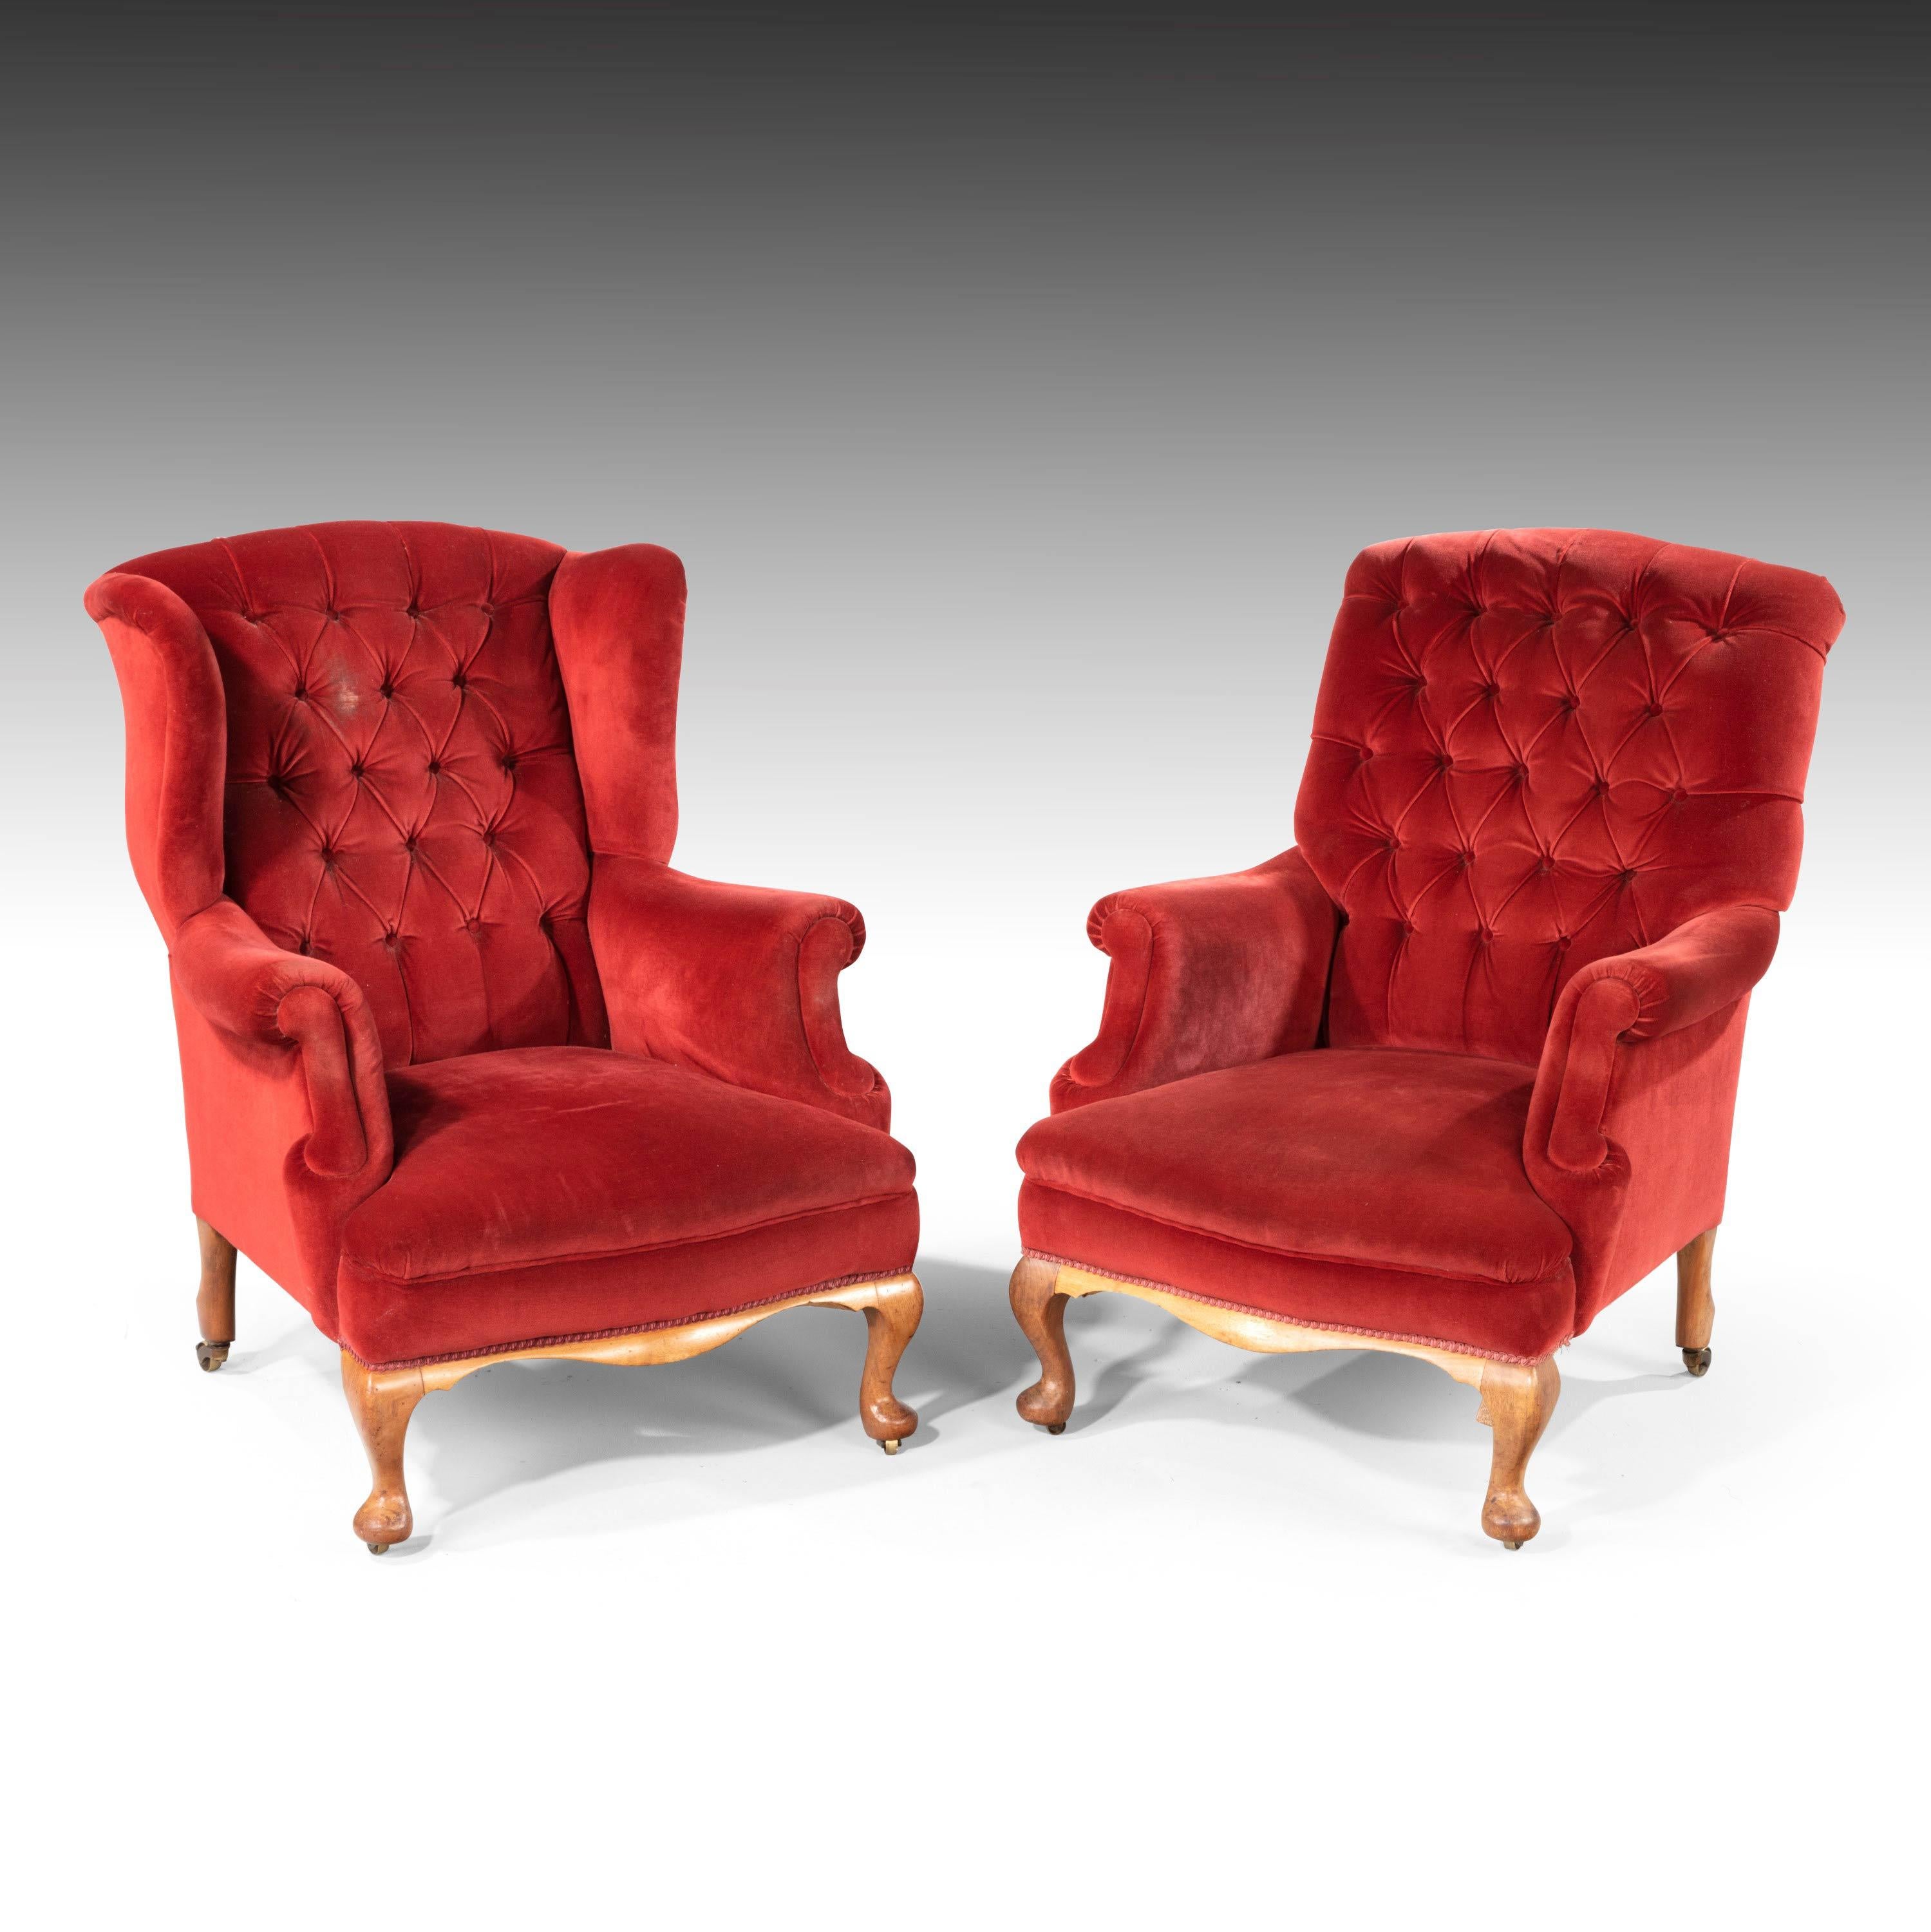 A handsome pair of shapely easy chairs. With serpentine wings and scrolled arms. Of substantial size. The supports of Queen Anne design with a scrolled foot with a wavy front border. With horse hair interiors. Now slightly tired but still in